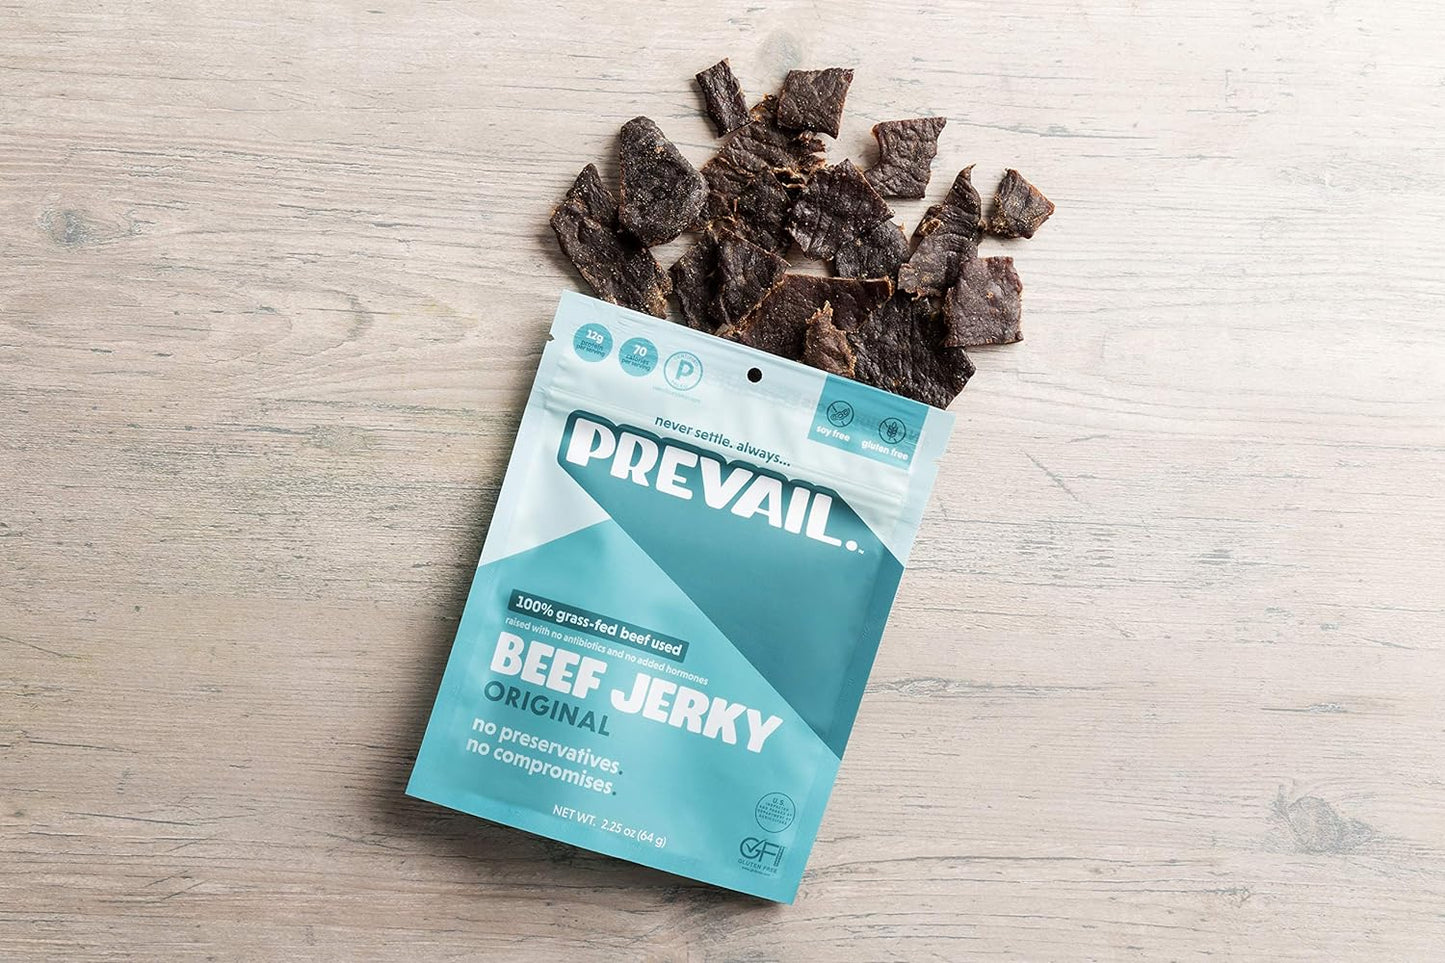 Grass Fed Beef Jerky Variety Pack, by PREVAIL - Low Sodium and Gluten Free! | Umami, Spicy, Lemongrass, and Original - Pack of (8) Bags | | Our Gourmet Jerky Is Paleo Certified, Soy Free, Free of Preservatives, and Contains No Gmo'S!